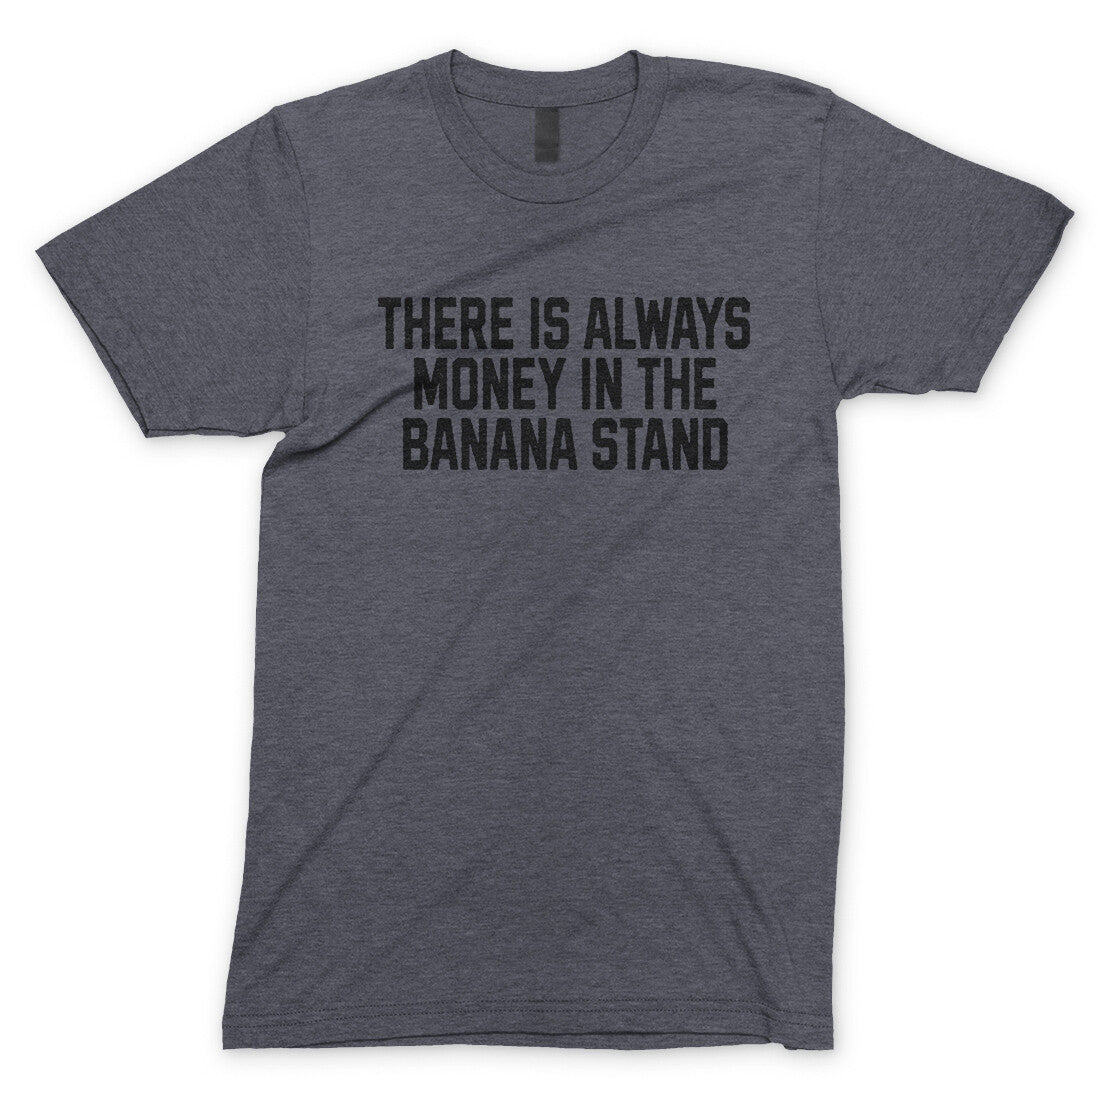 There is Always Money in the Banana Stand in Dark Heather Color